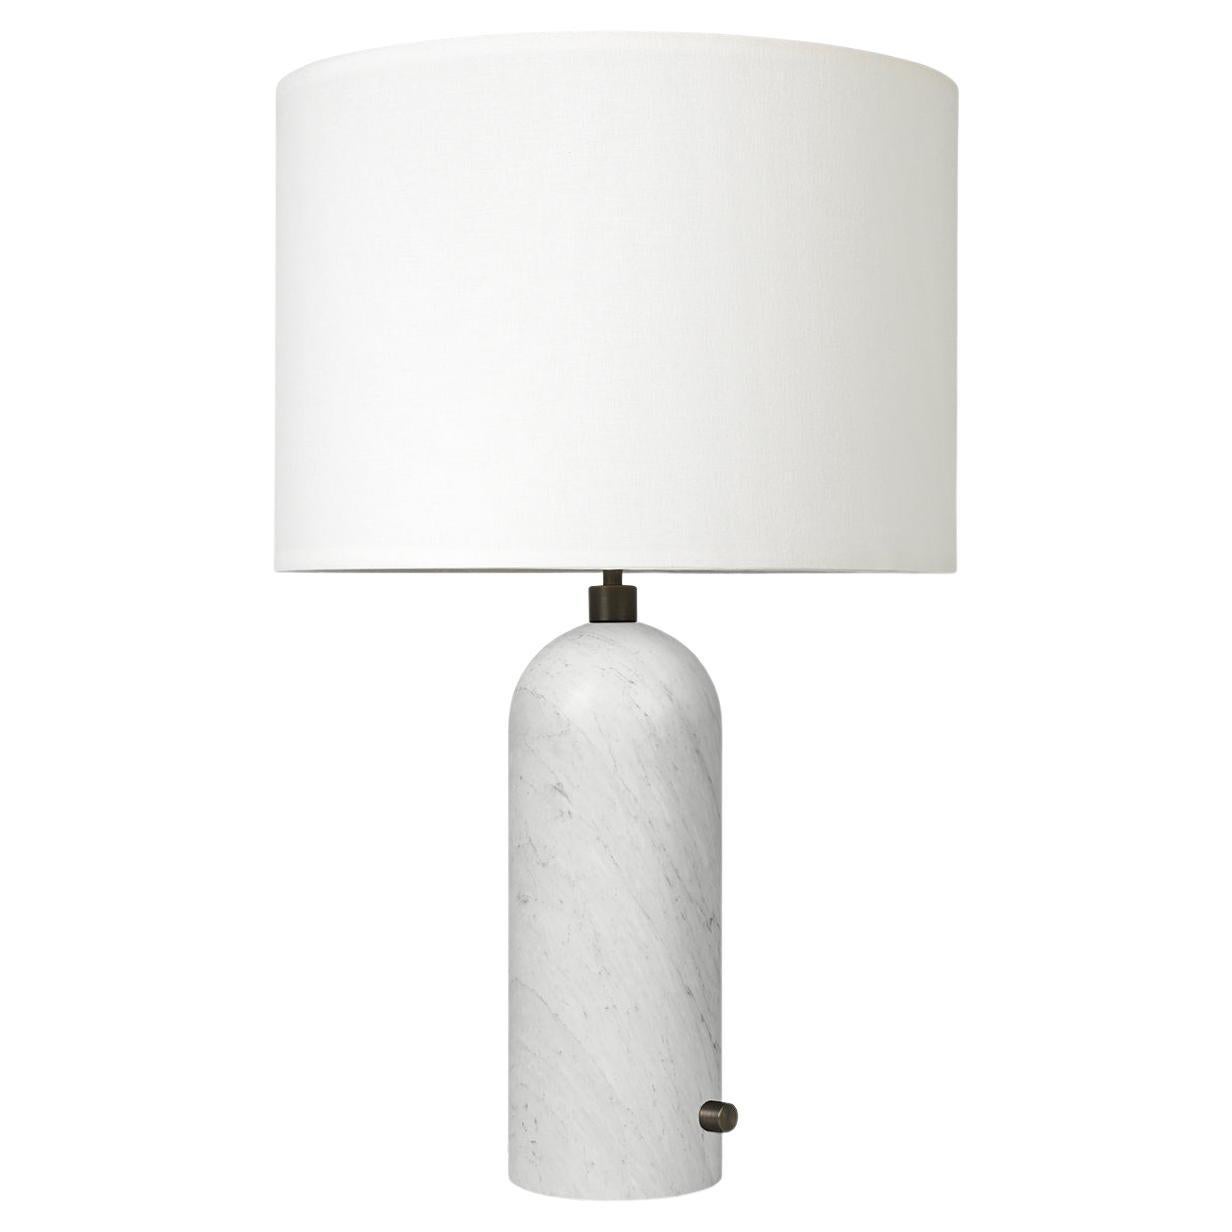 Gravity Table Lamp - Large, White Marble, White For Sale